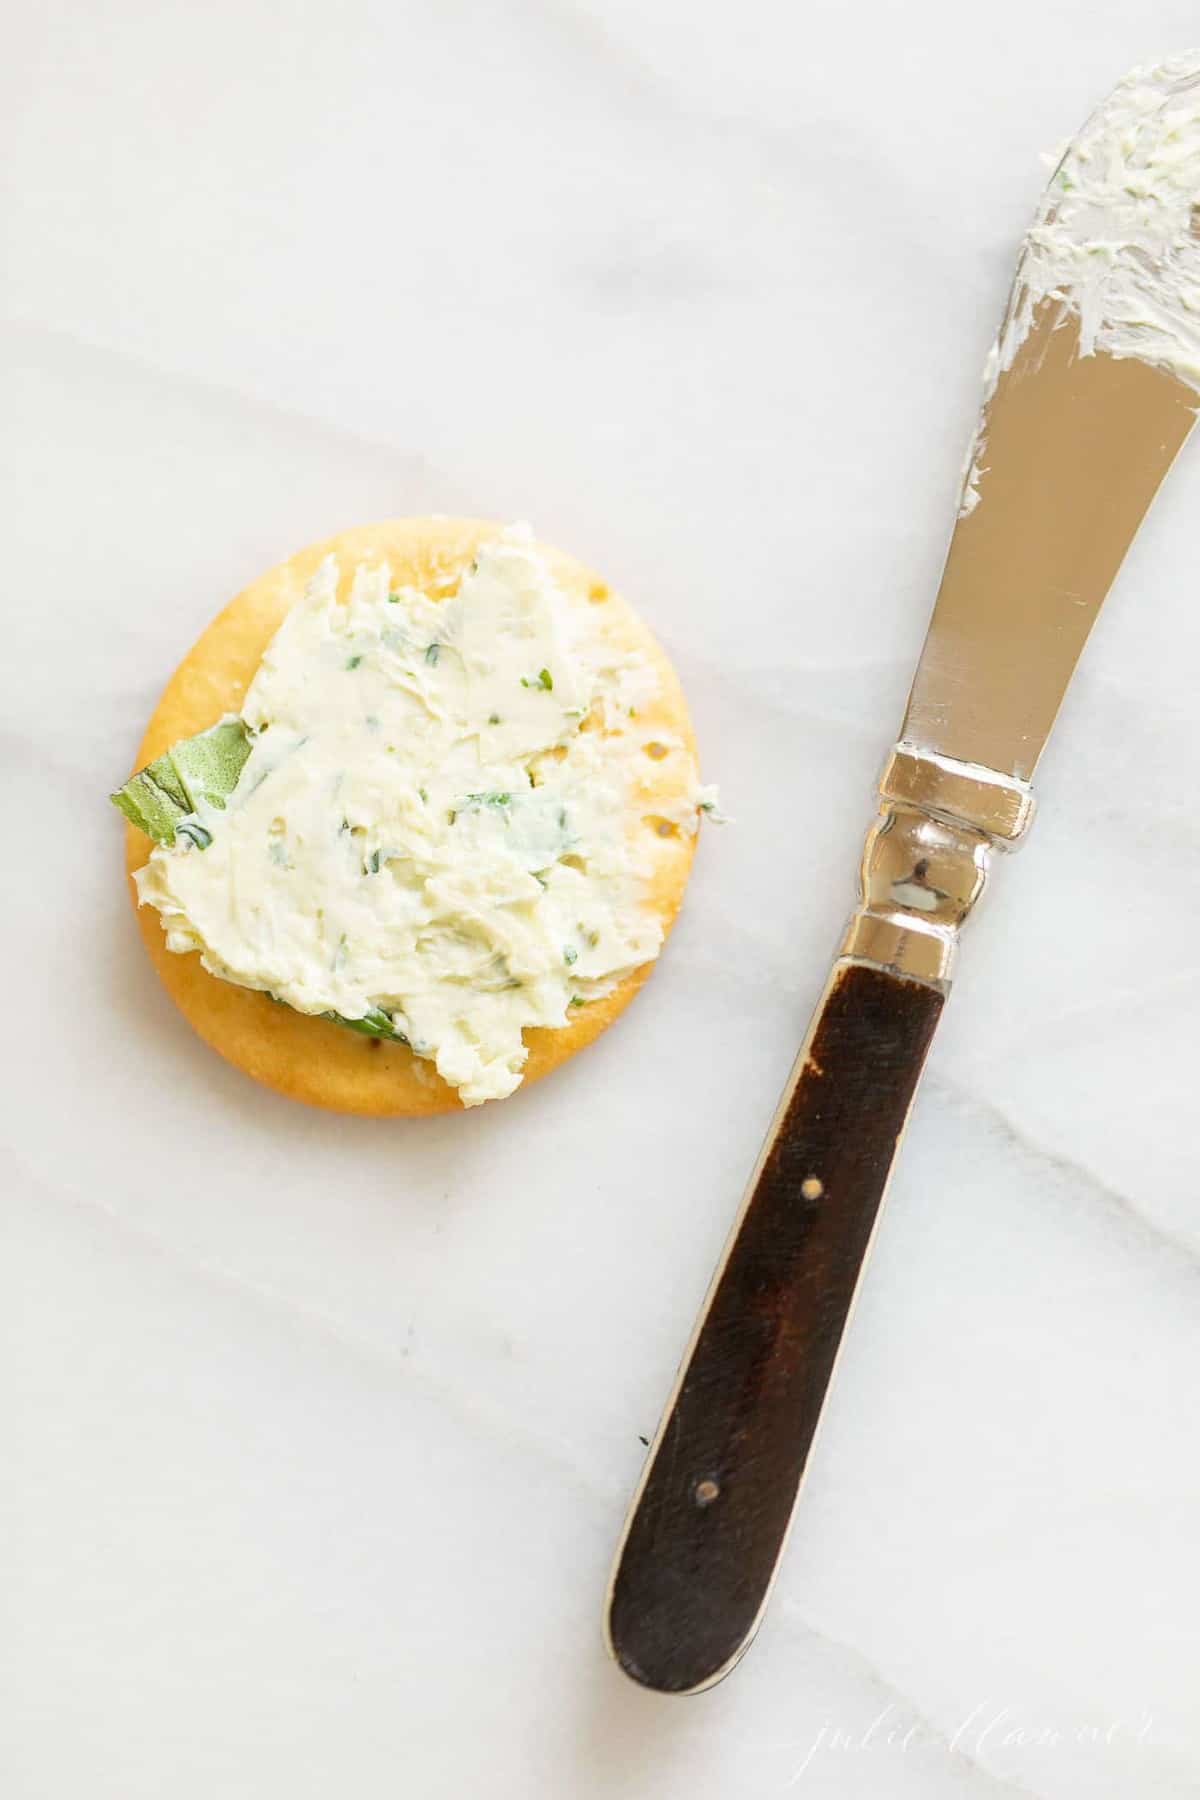 Marble surface with a single cracker covered in pesto cheeseball spread, knife to the side.